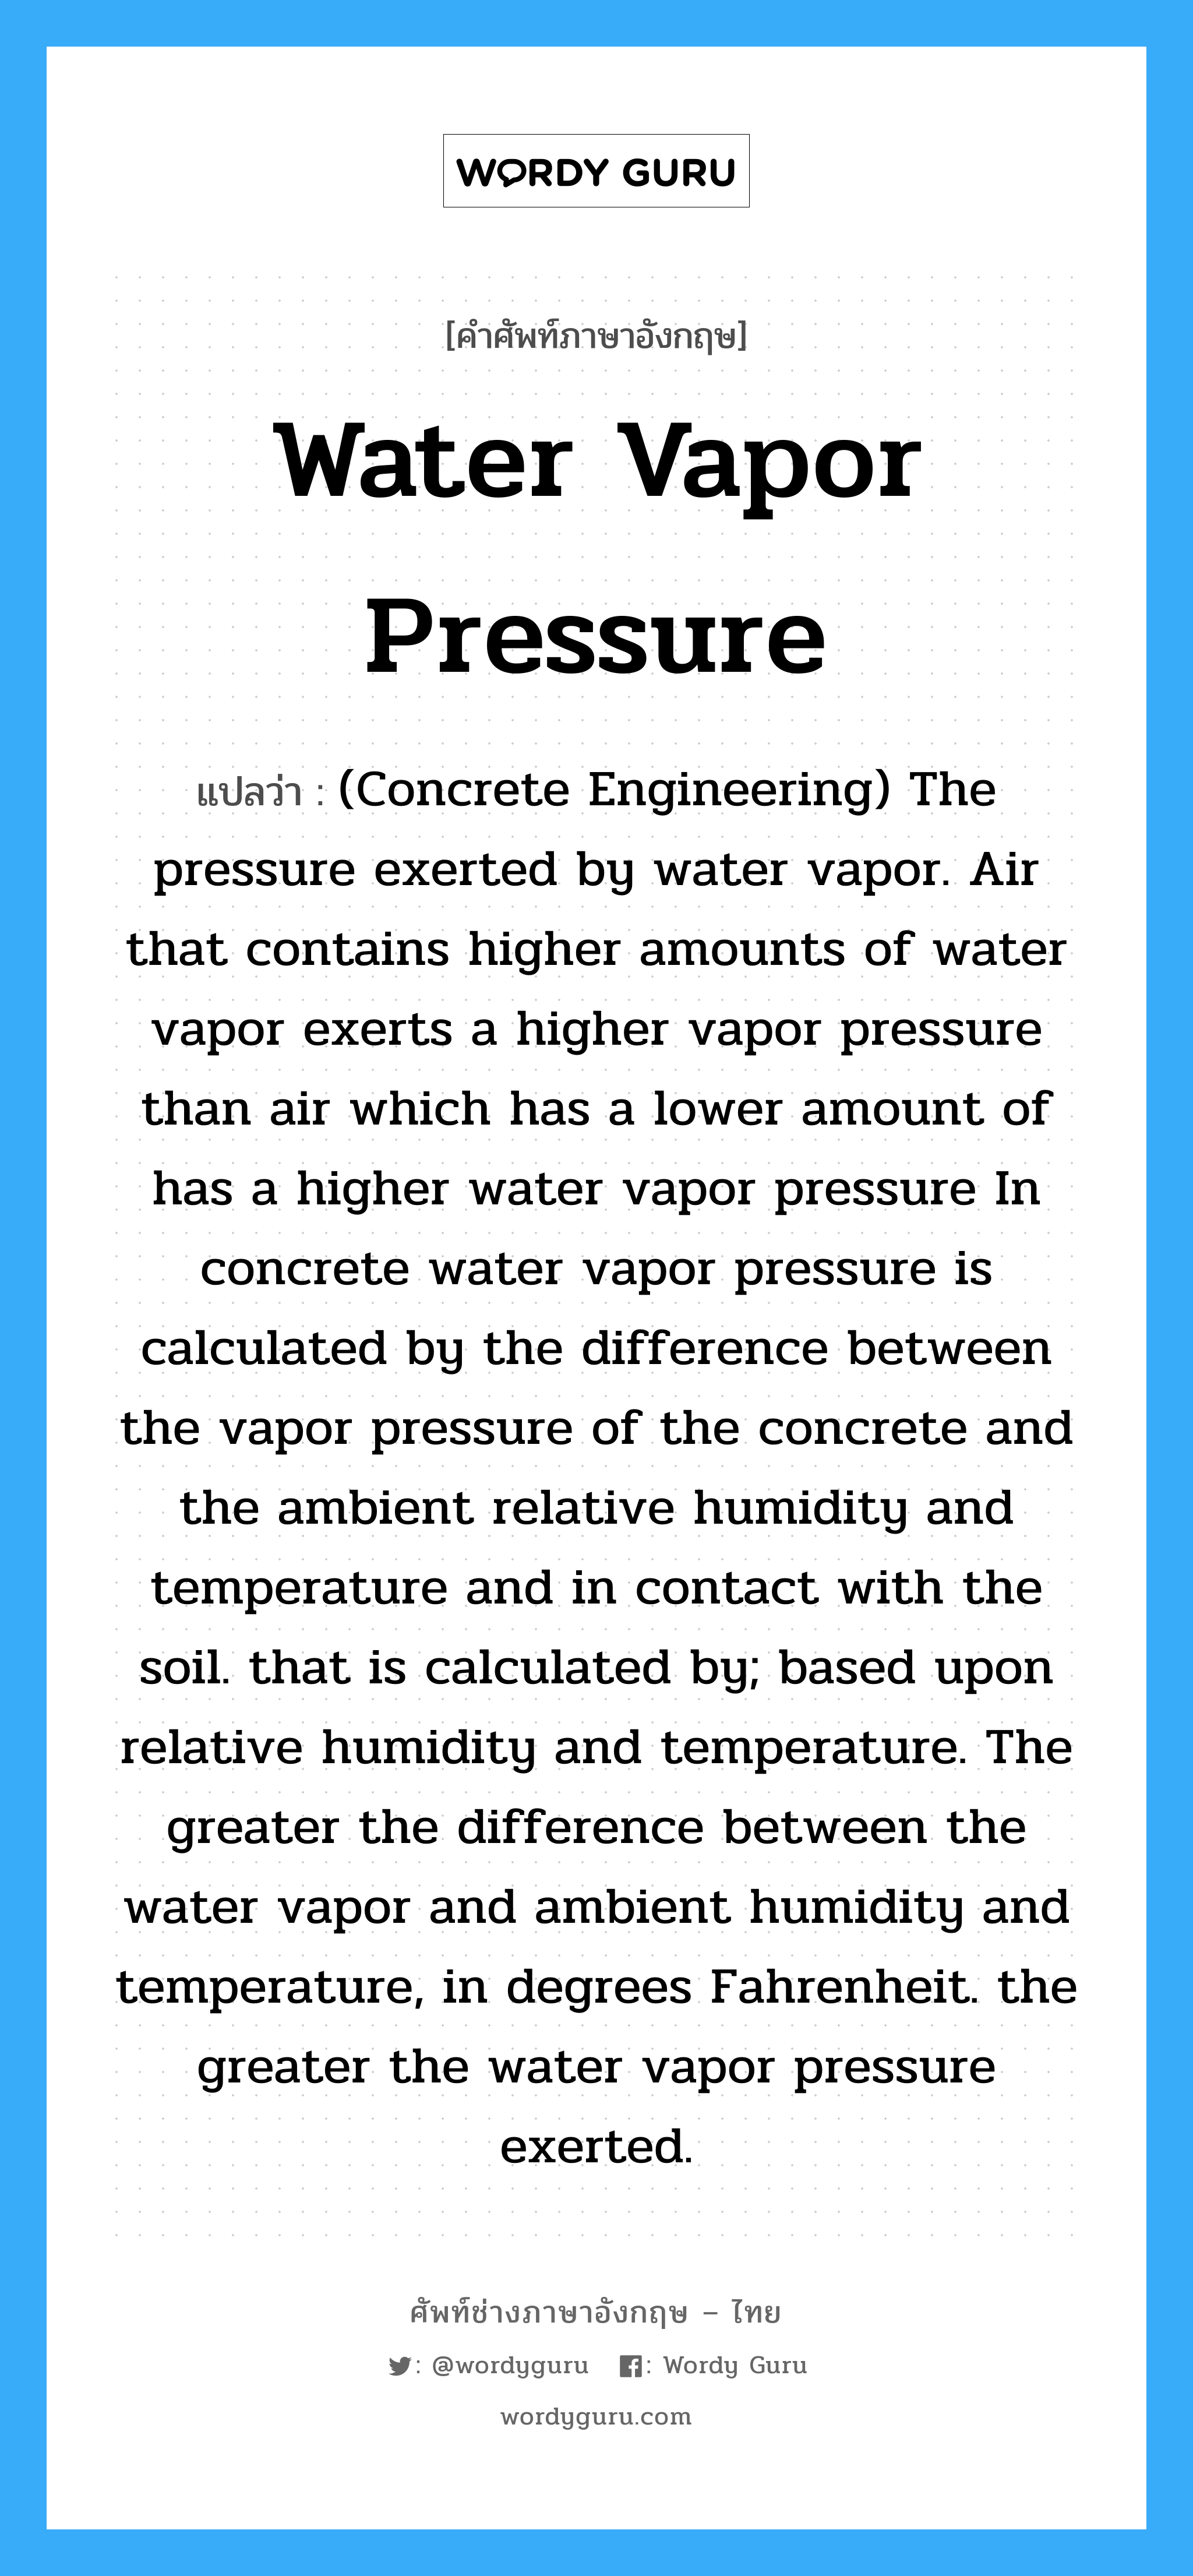 Water Vapor Pressure แปลว่า?, คำศัพท์ช่างภาษาอังกฤษ - ไทย Water Vapor Pressure คำศัพท์ภาษาอังกฤษ Water Vapor Pressure แปลว่า (Concrete Engineering) The pressure exerted by water vapor. Air that contains higher amounts of water vapor exerts a higher vapor pressure than air which has a lower amount of has a higher water vapor pressure In concrete water vapor pressure is calculated by the difference between the vapor pressure of the concrete and the ambient relative humidity and temperature and in contact with the soil. that is calculated by; based upon relative humidity and temperature. The greater the difference between the water vapor and ambient humidity and temperature, in degrees Fahrenheit. the greater the water vapor pressure exerted.